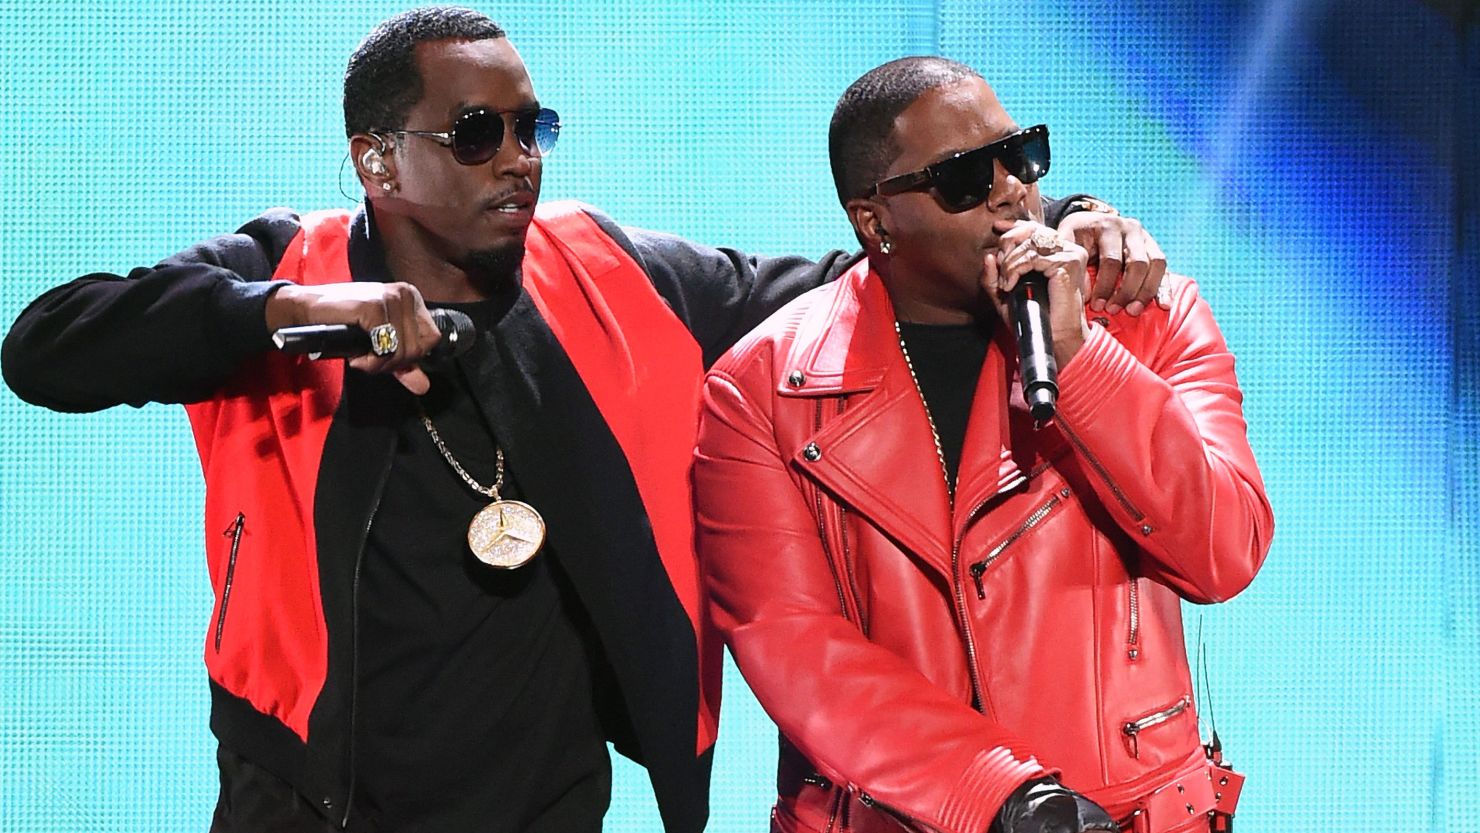 Sean Combs (L) and Mase perform at the 2015 iHeartRadio Music Festival in Las Vegas, Nevada.  